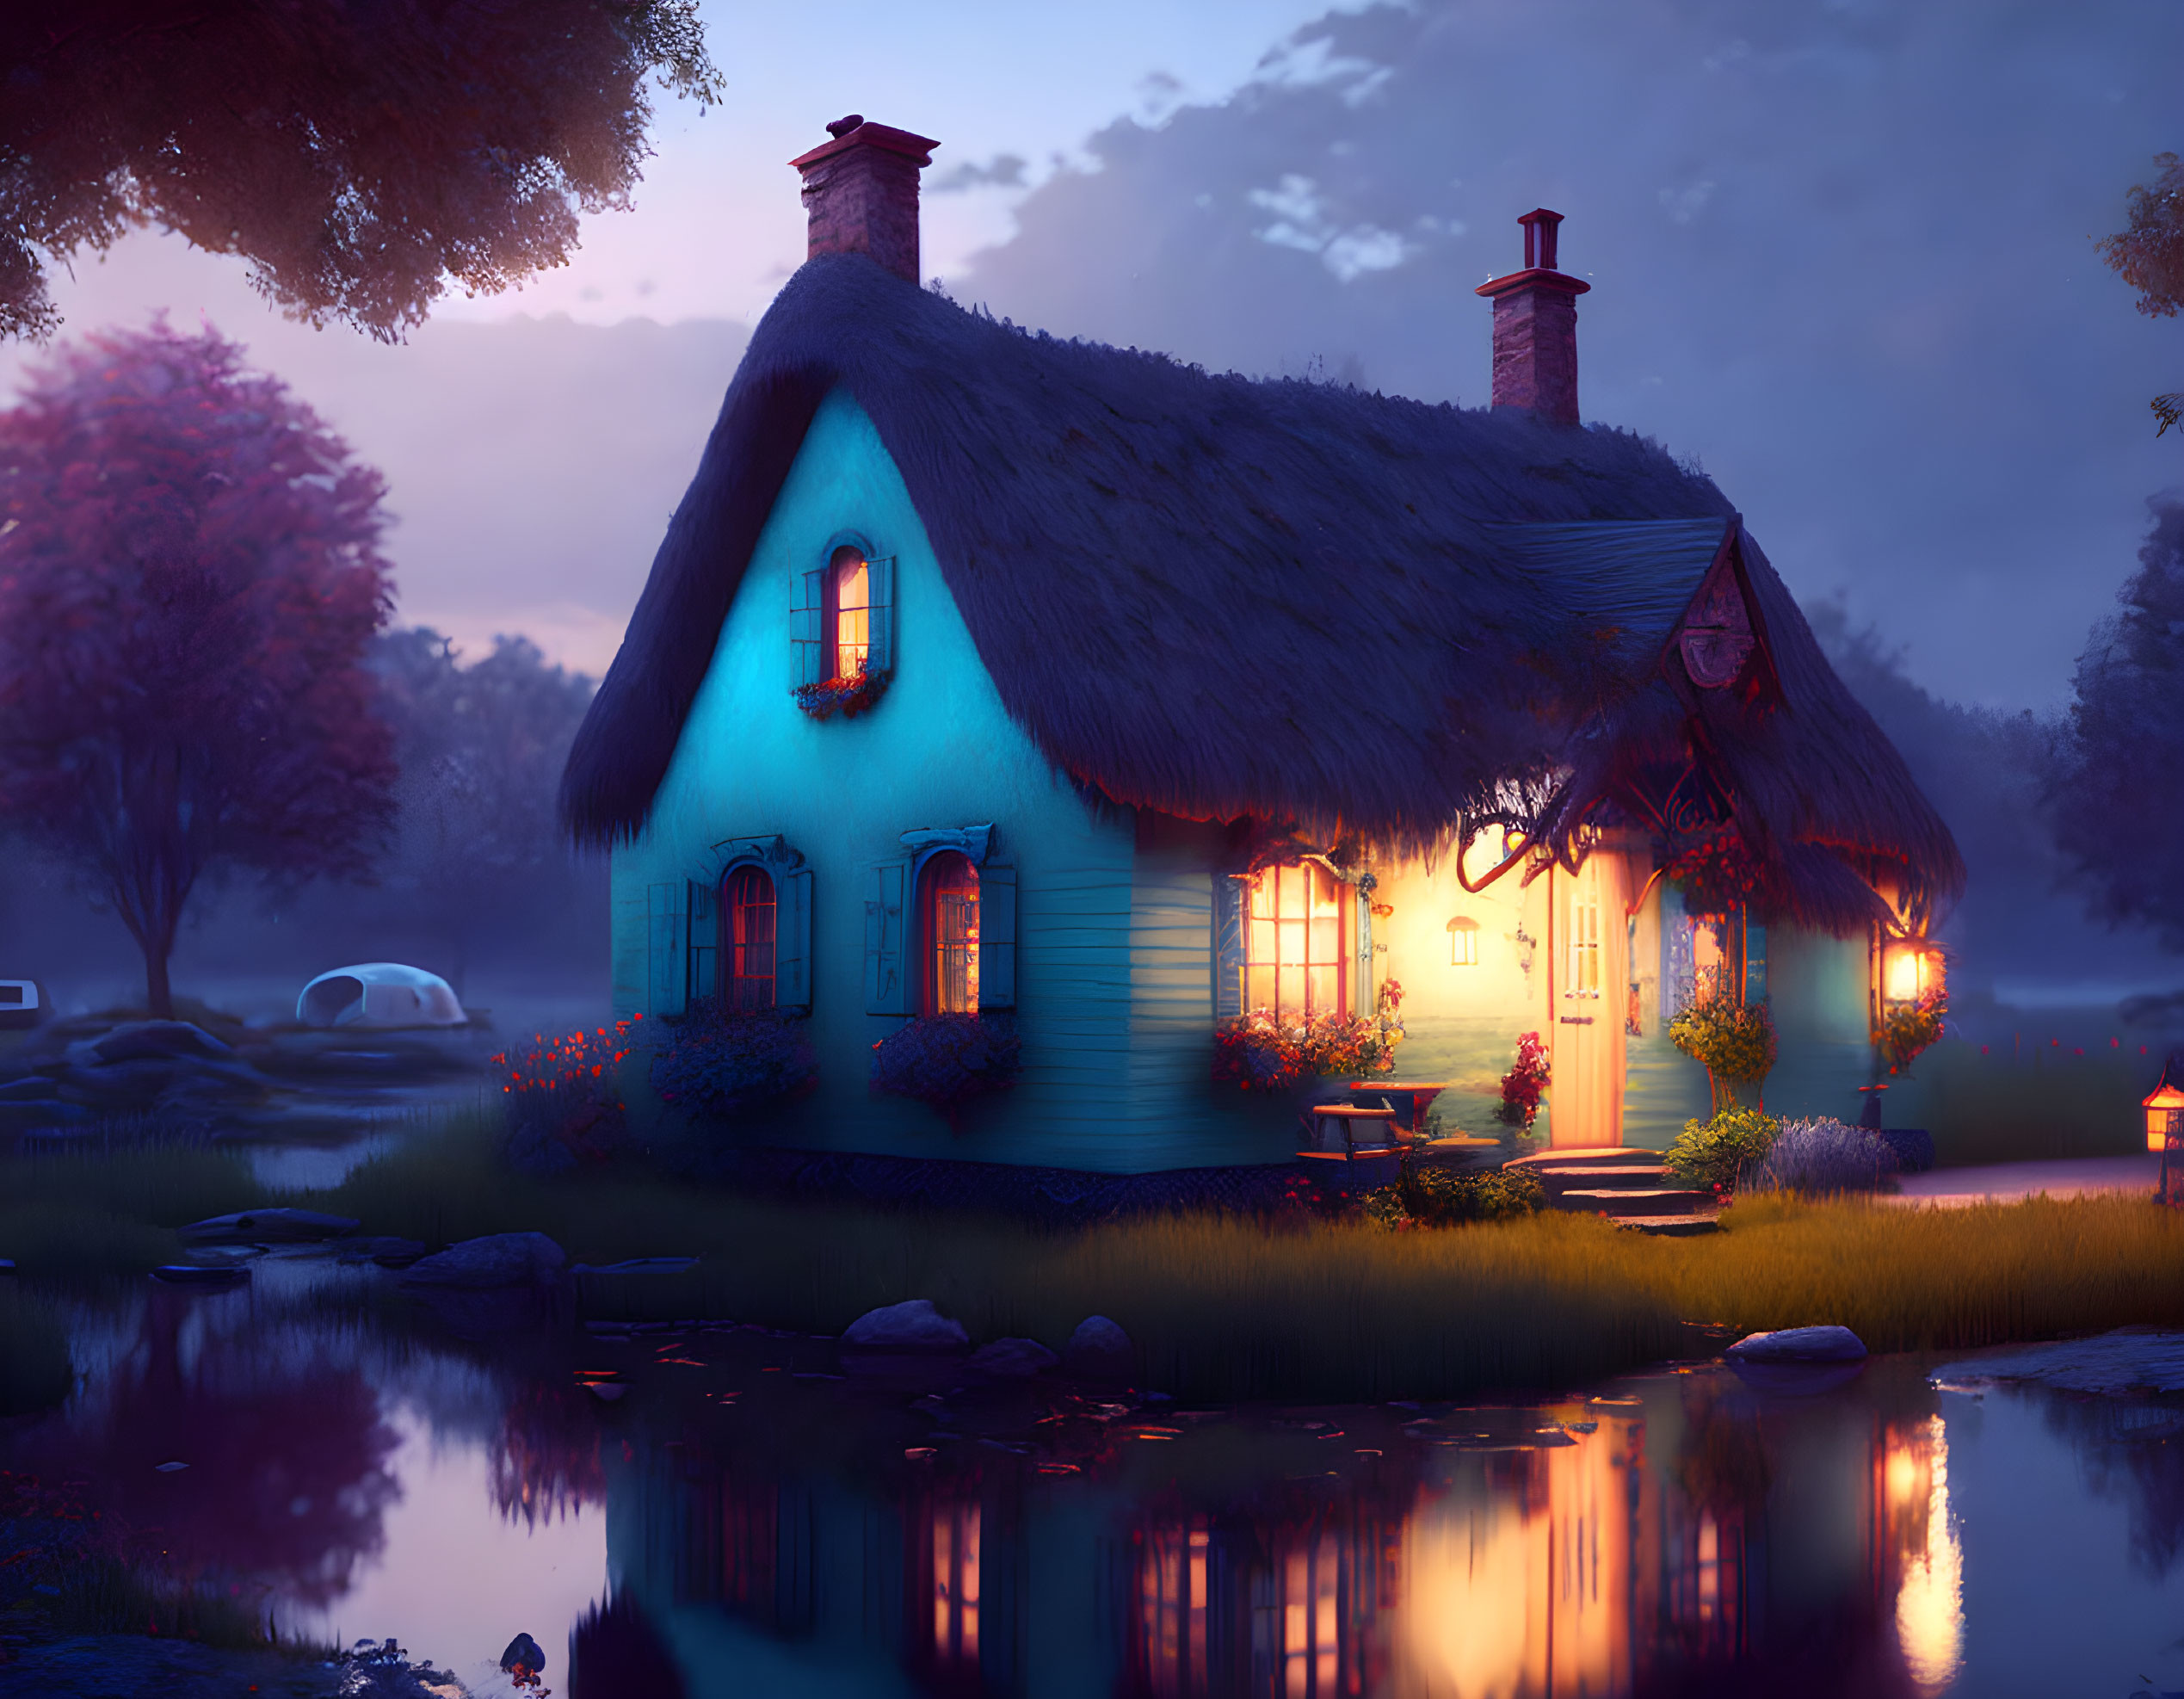 Twilight scene of thatched cottage with glowing windows, surrounded by trees and pond.